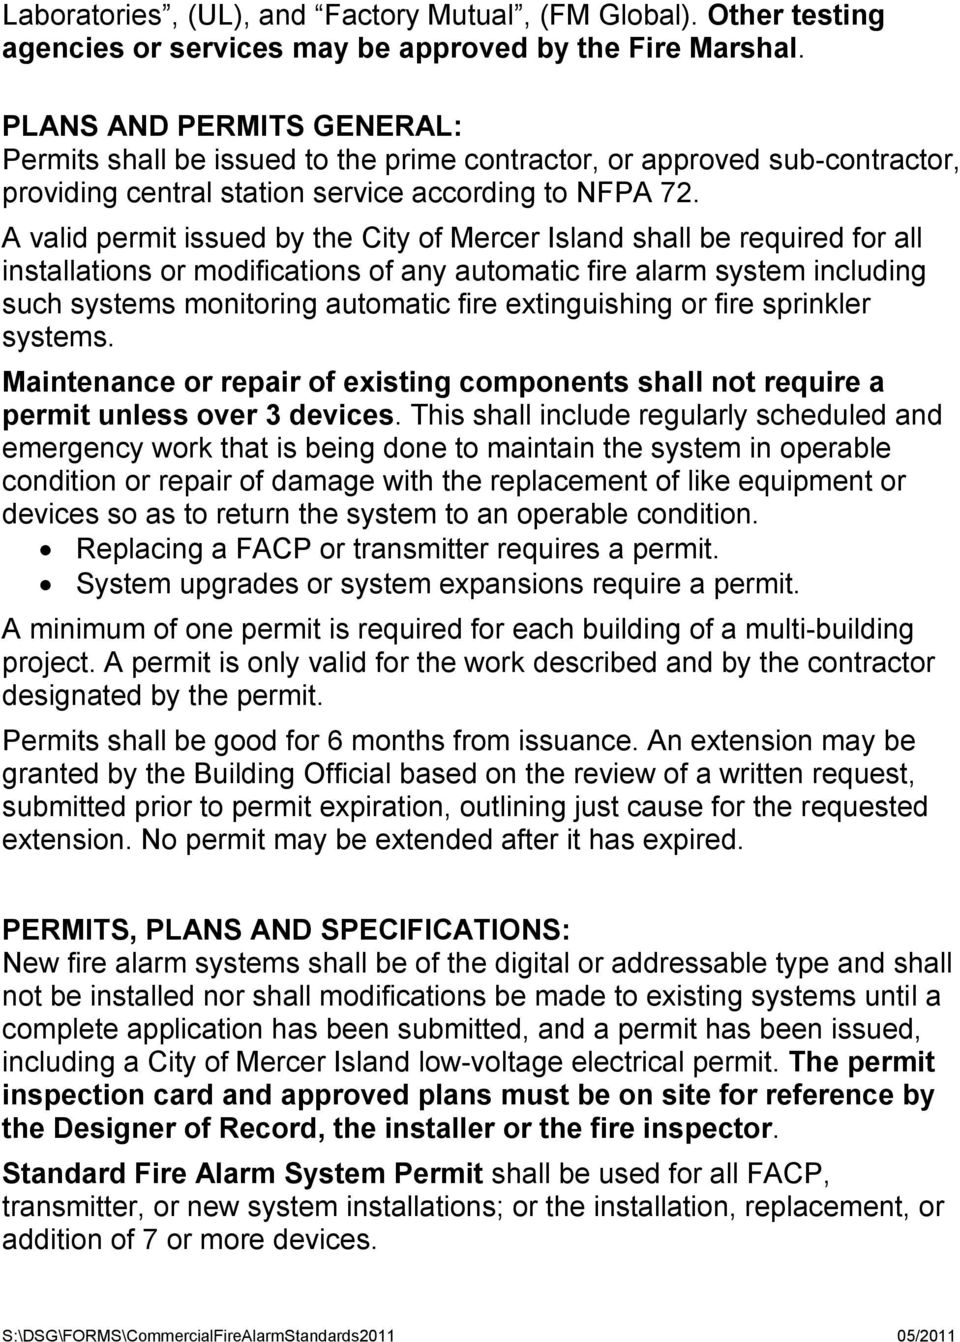 A valid permit issued by the City of Mercer Island shall be required for all installations or modifications of any automatic fire alarm system including such systems monitoring automatic fire